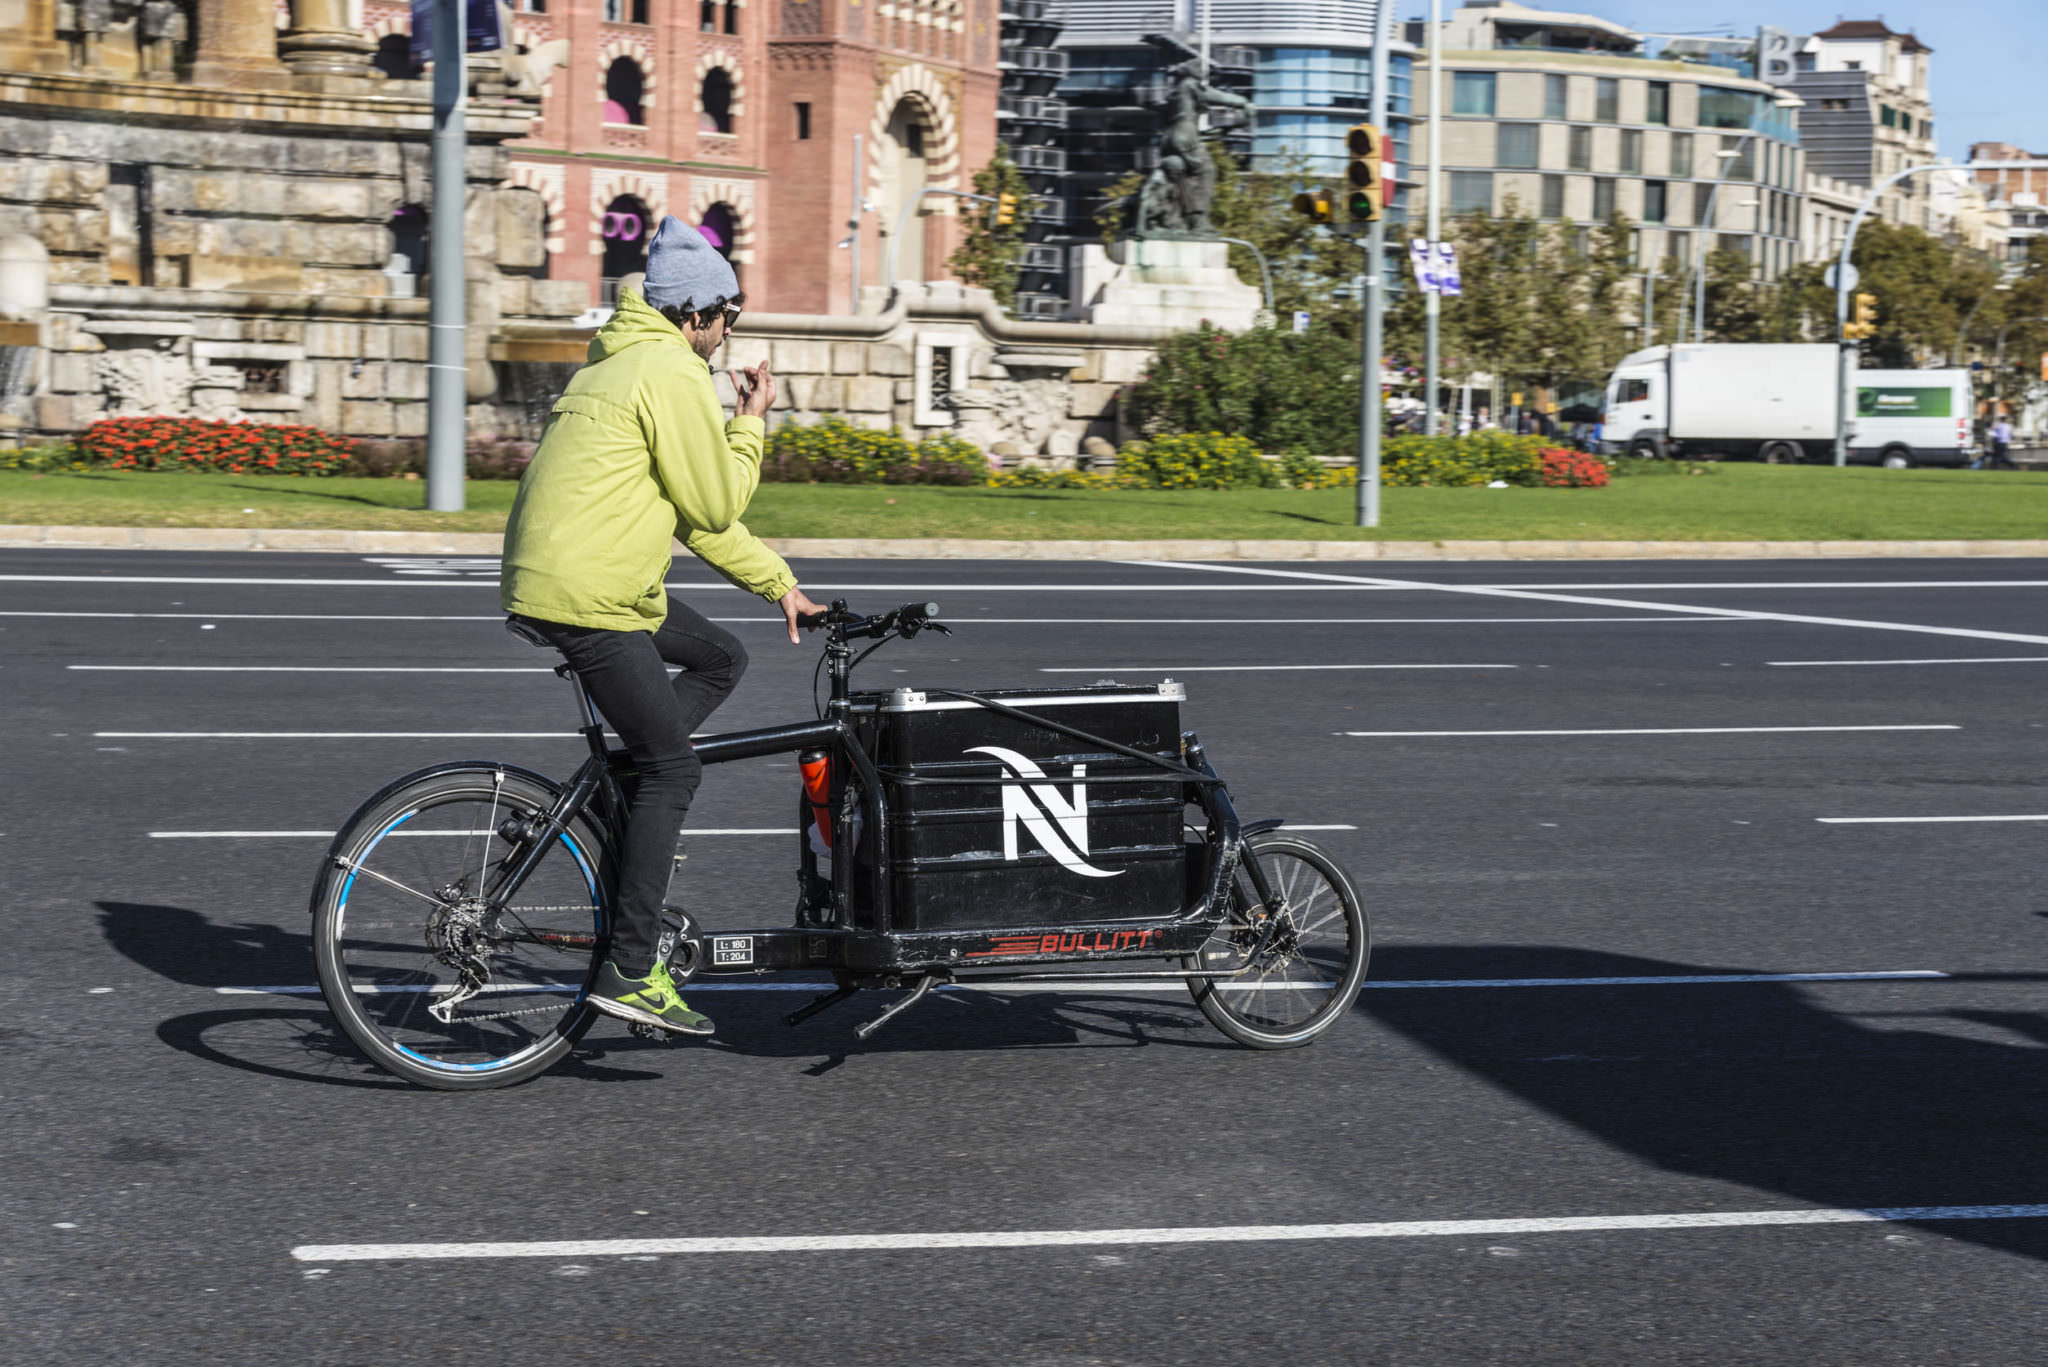 14 Reasons Why Cargo Bikes Are Better Than Delivery Trucks